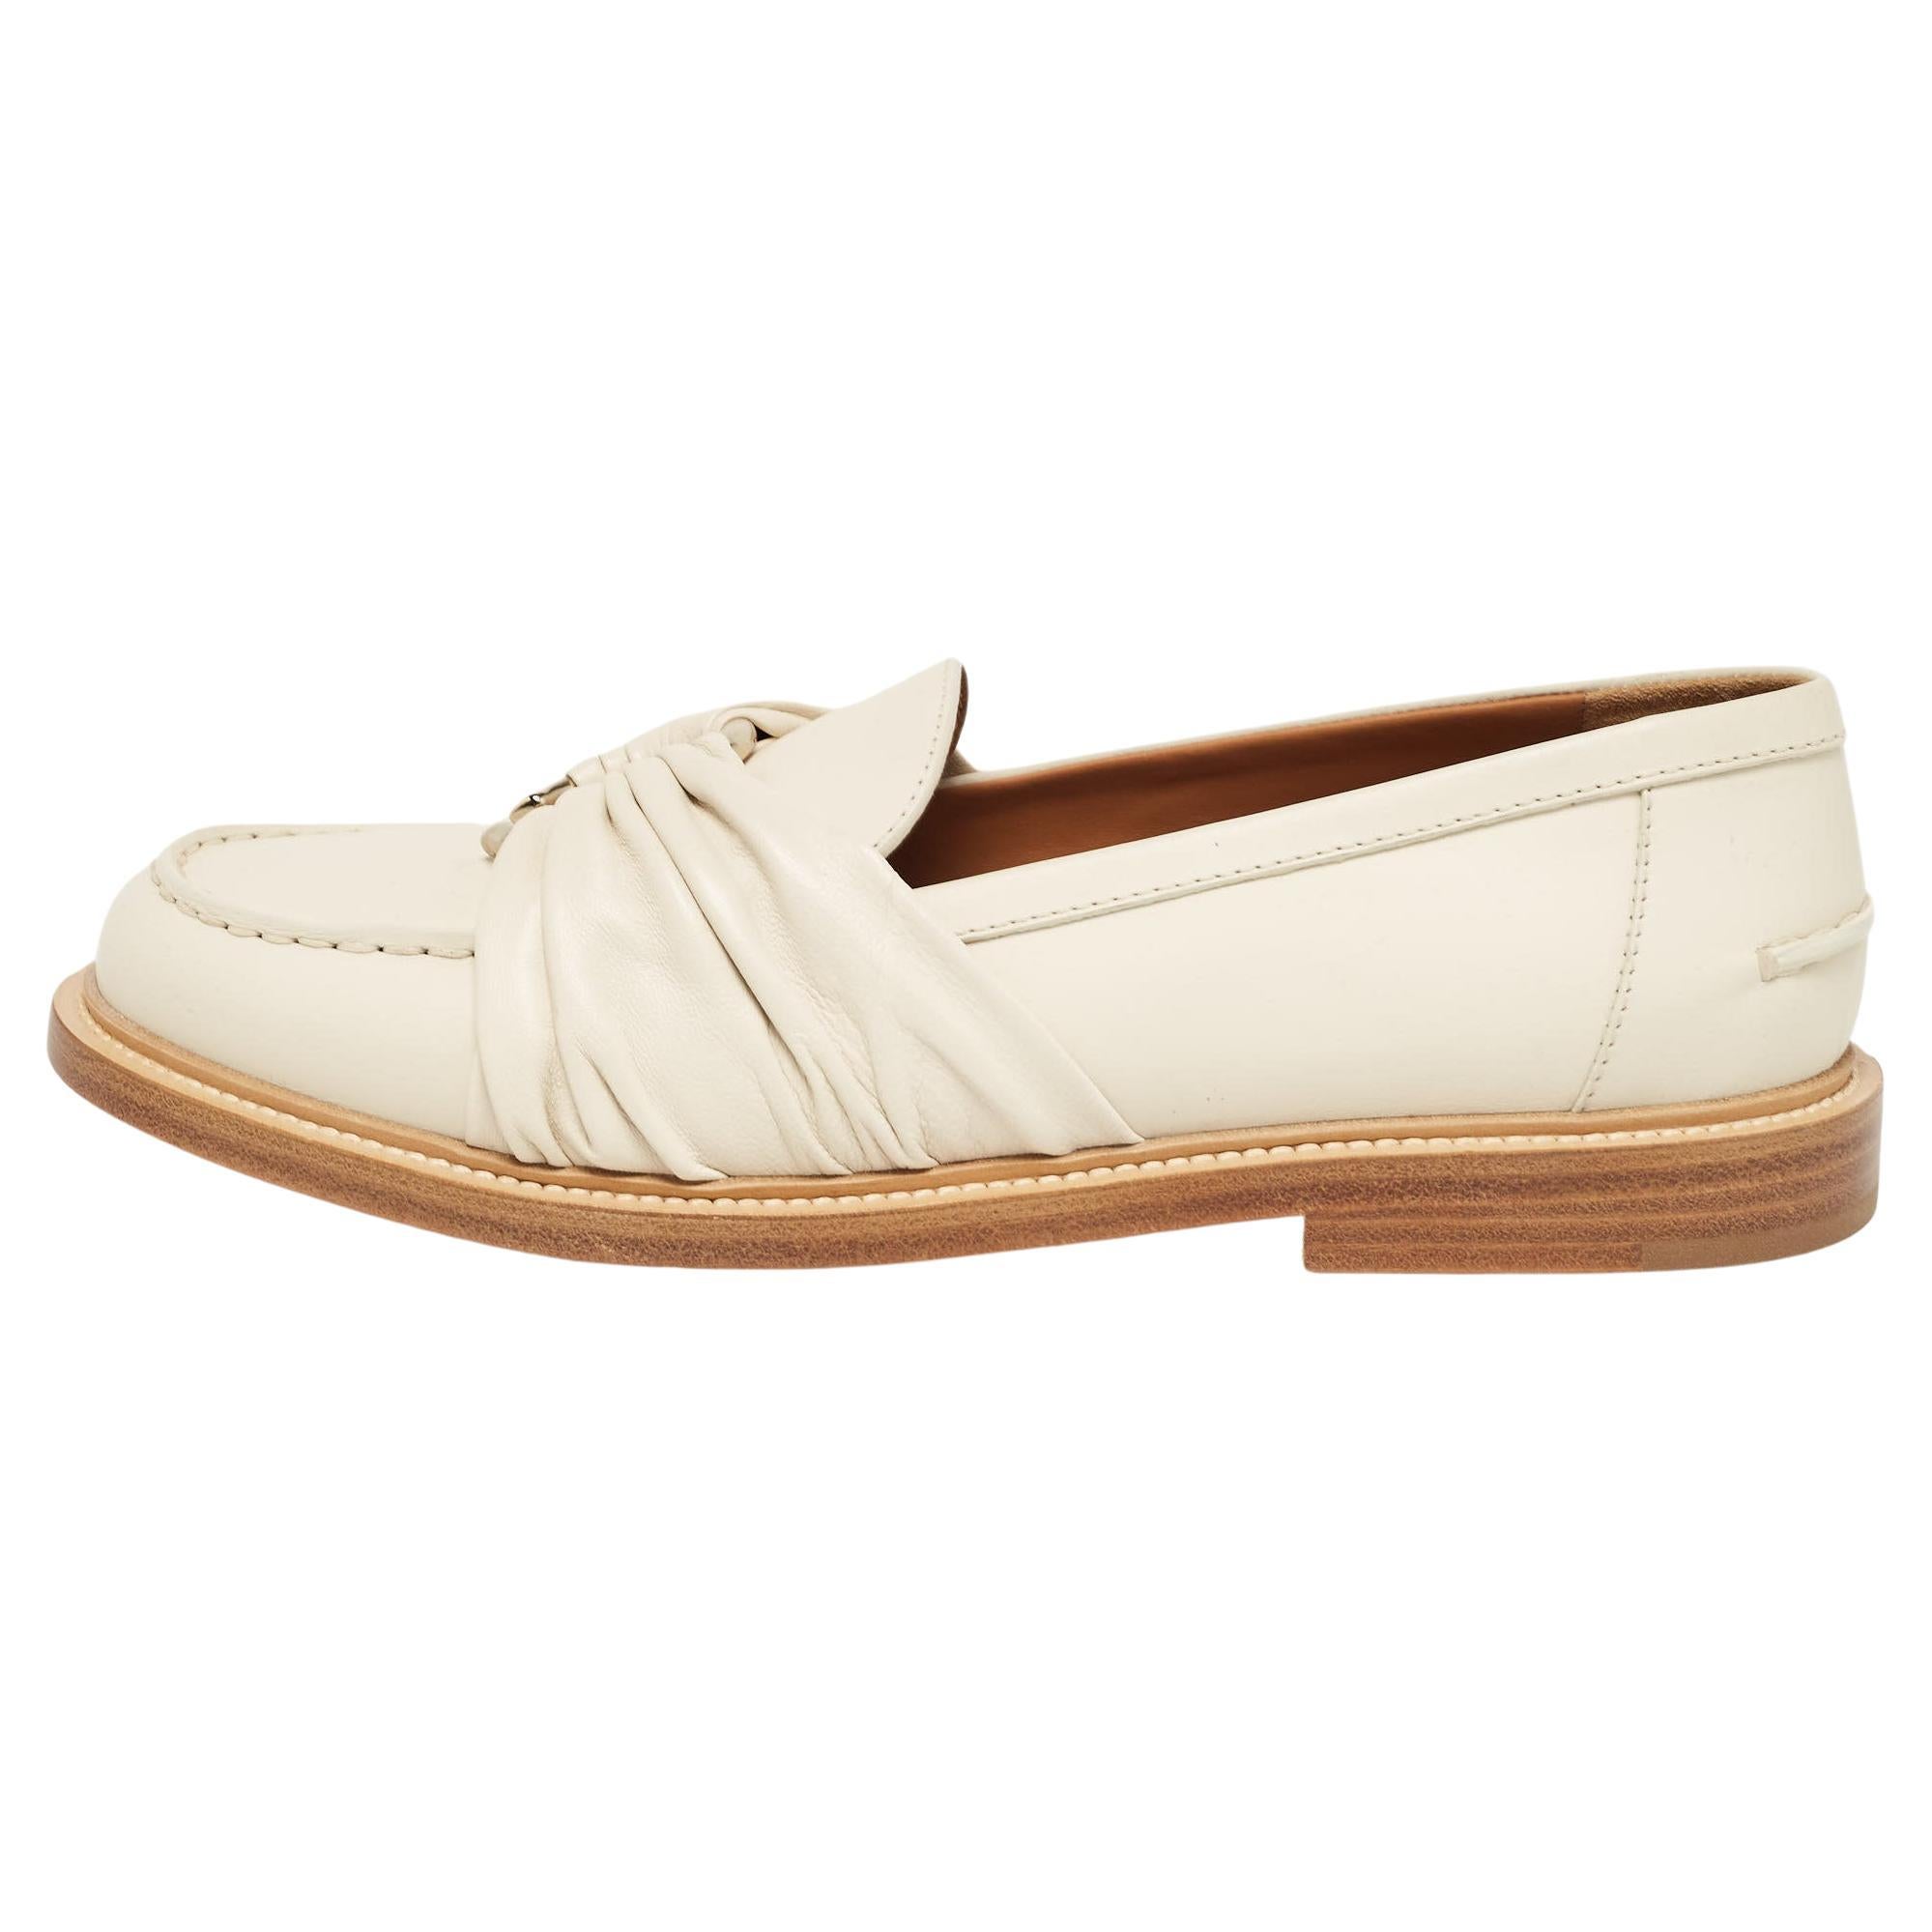 Chloe Cream Leather C Logo Loafers Size 40 For Sale